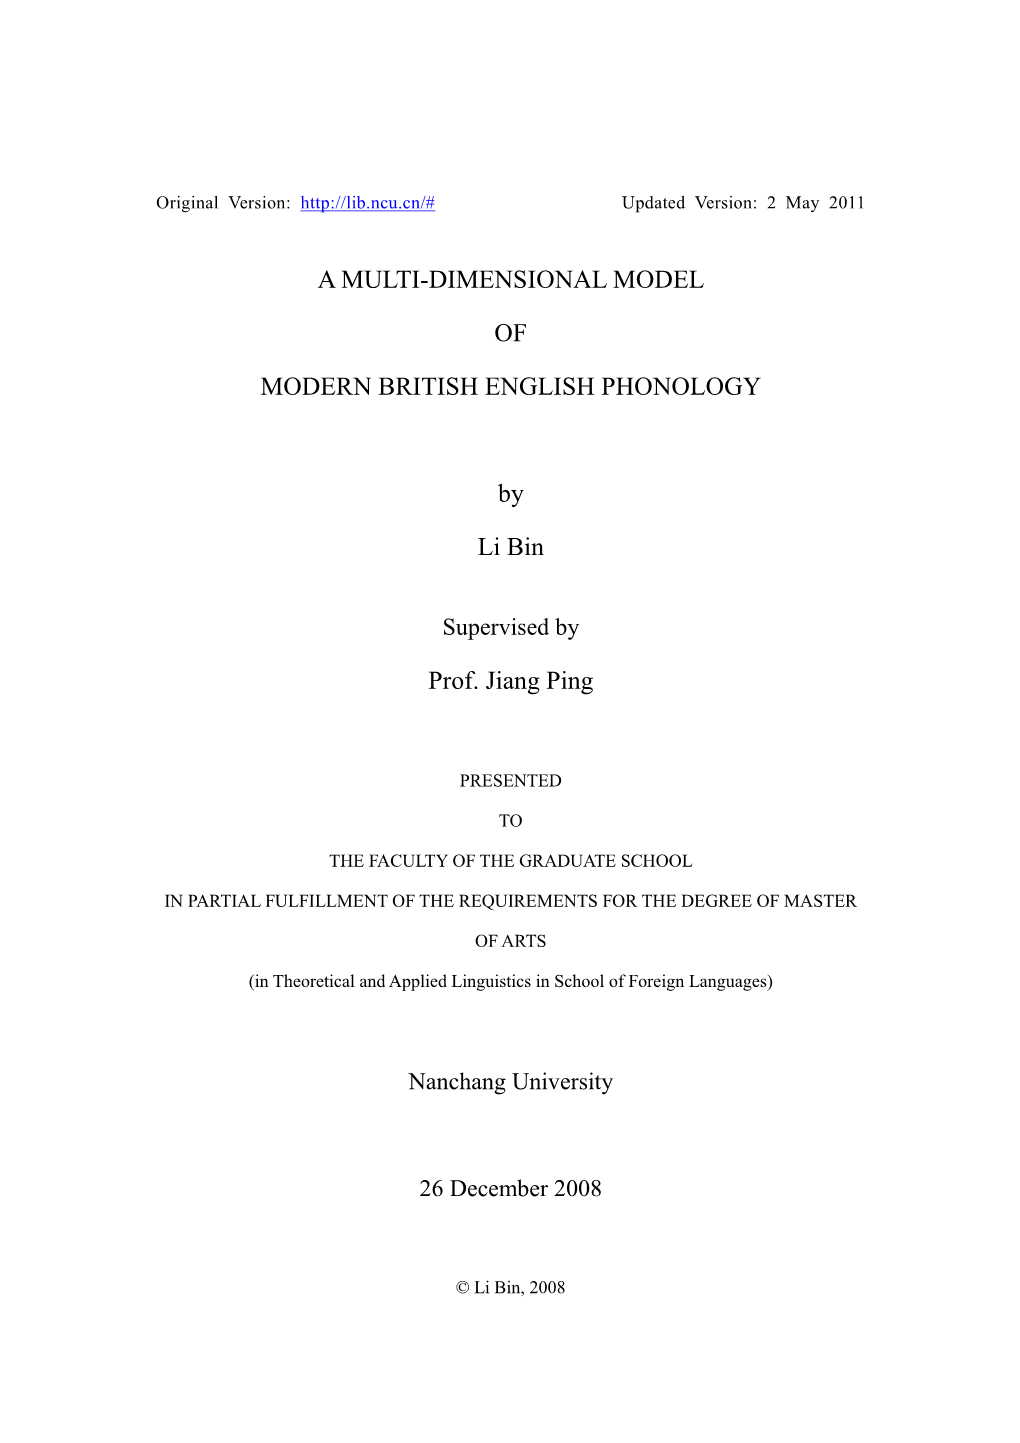 A Multi-Dimensional Model of Modern British English Phonology (MD Model of Modern Bre Phonology for Short) in This Thesis